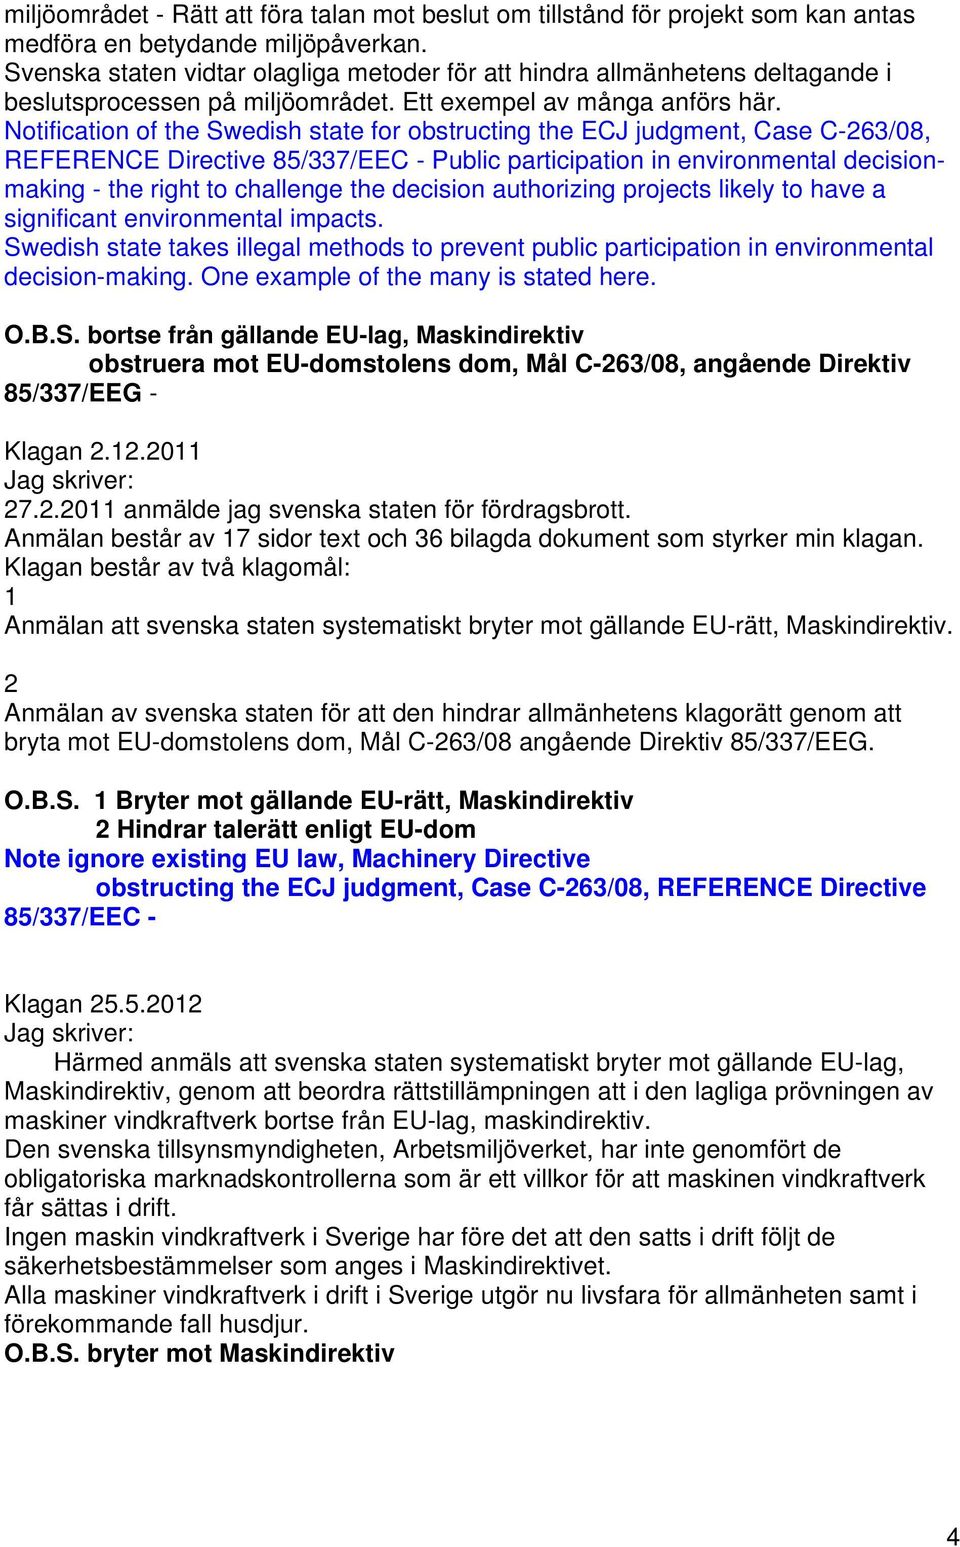 Notification of the Swedish state for obstructing the ECJ judgment, Case C-263/08, REFERENCE Directive 85/337/EEC - Public participation in environmental decisionmaking - the right to challenge the